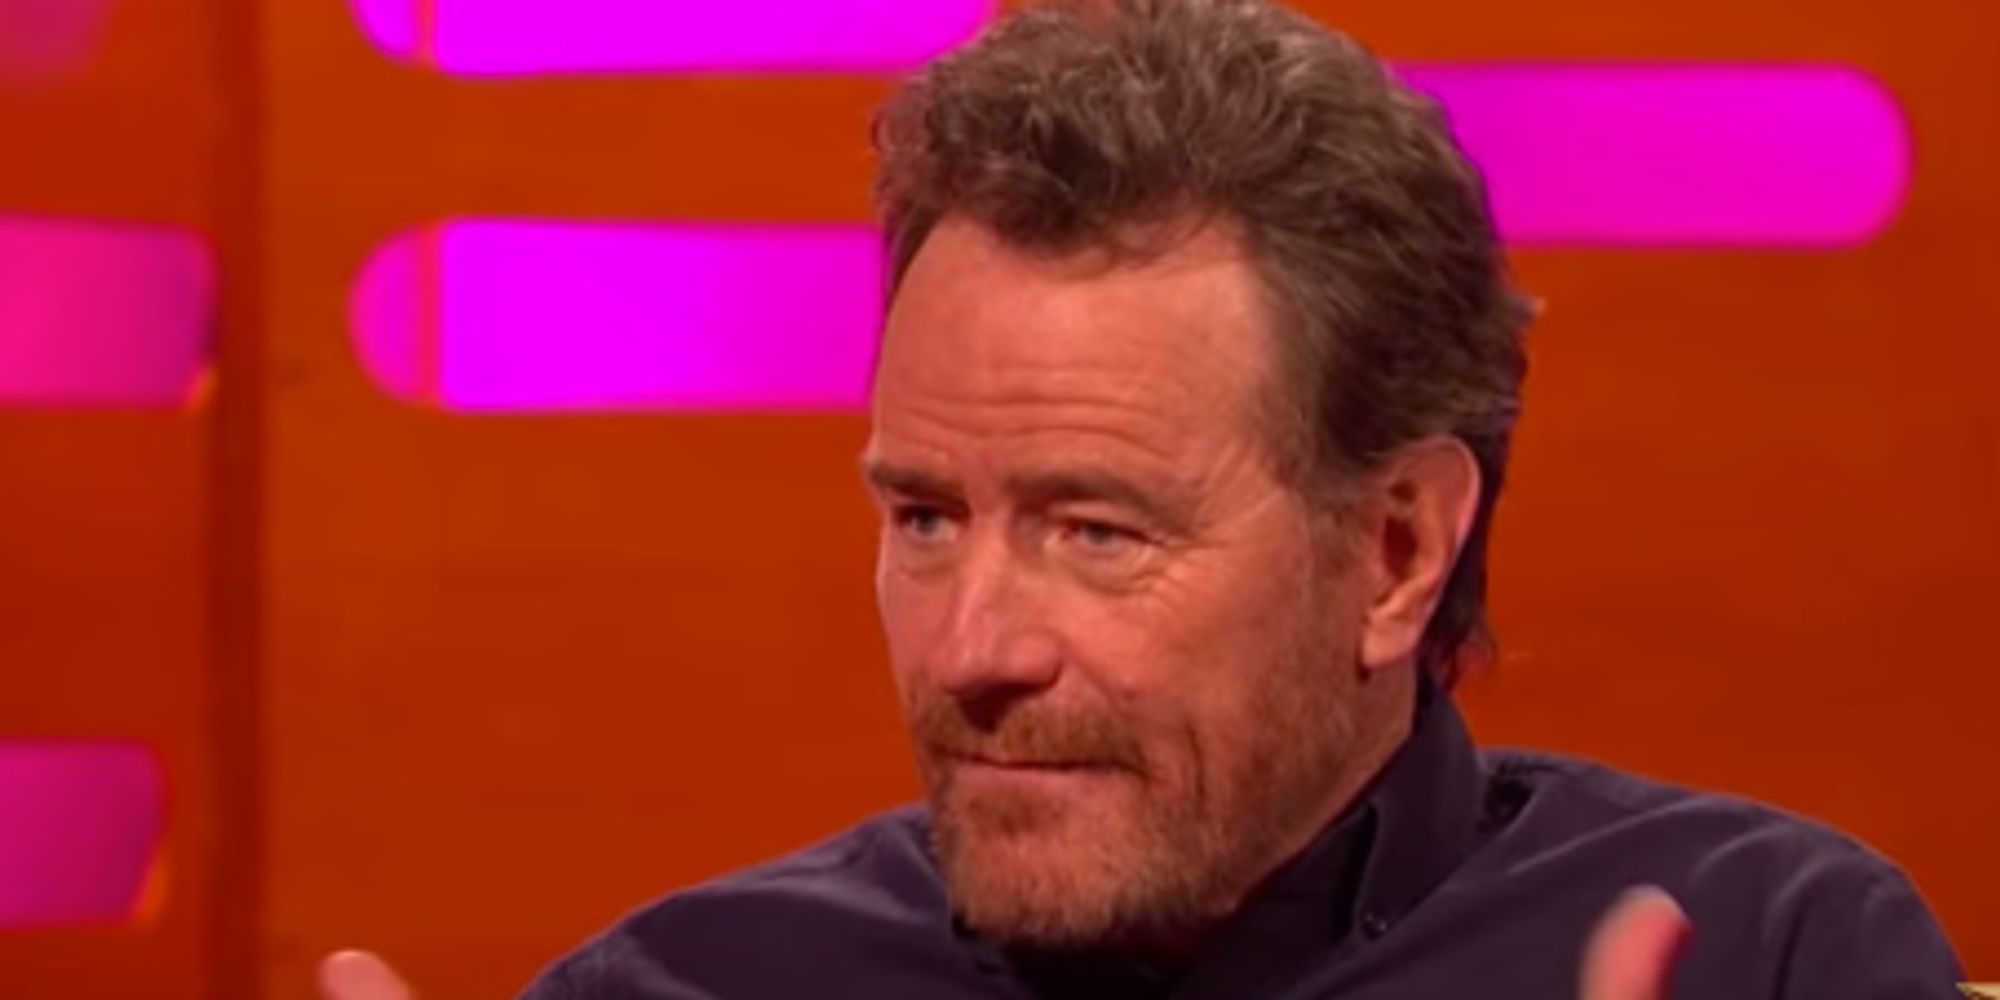 Bryan Cranston Once Married A Couple Flying Over The Hollywood Sign - Huffington Post